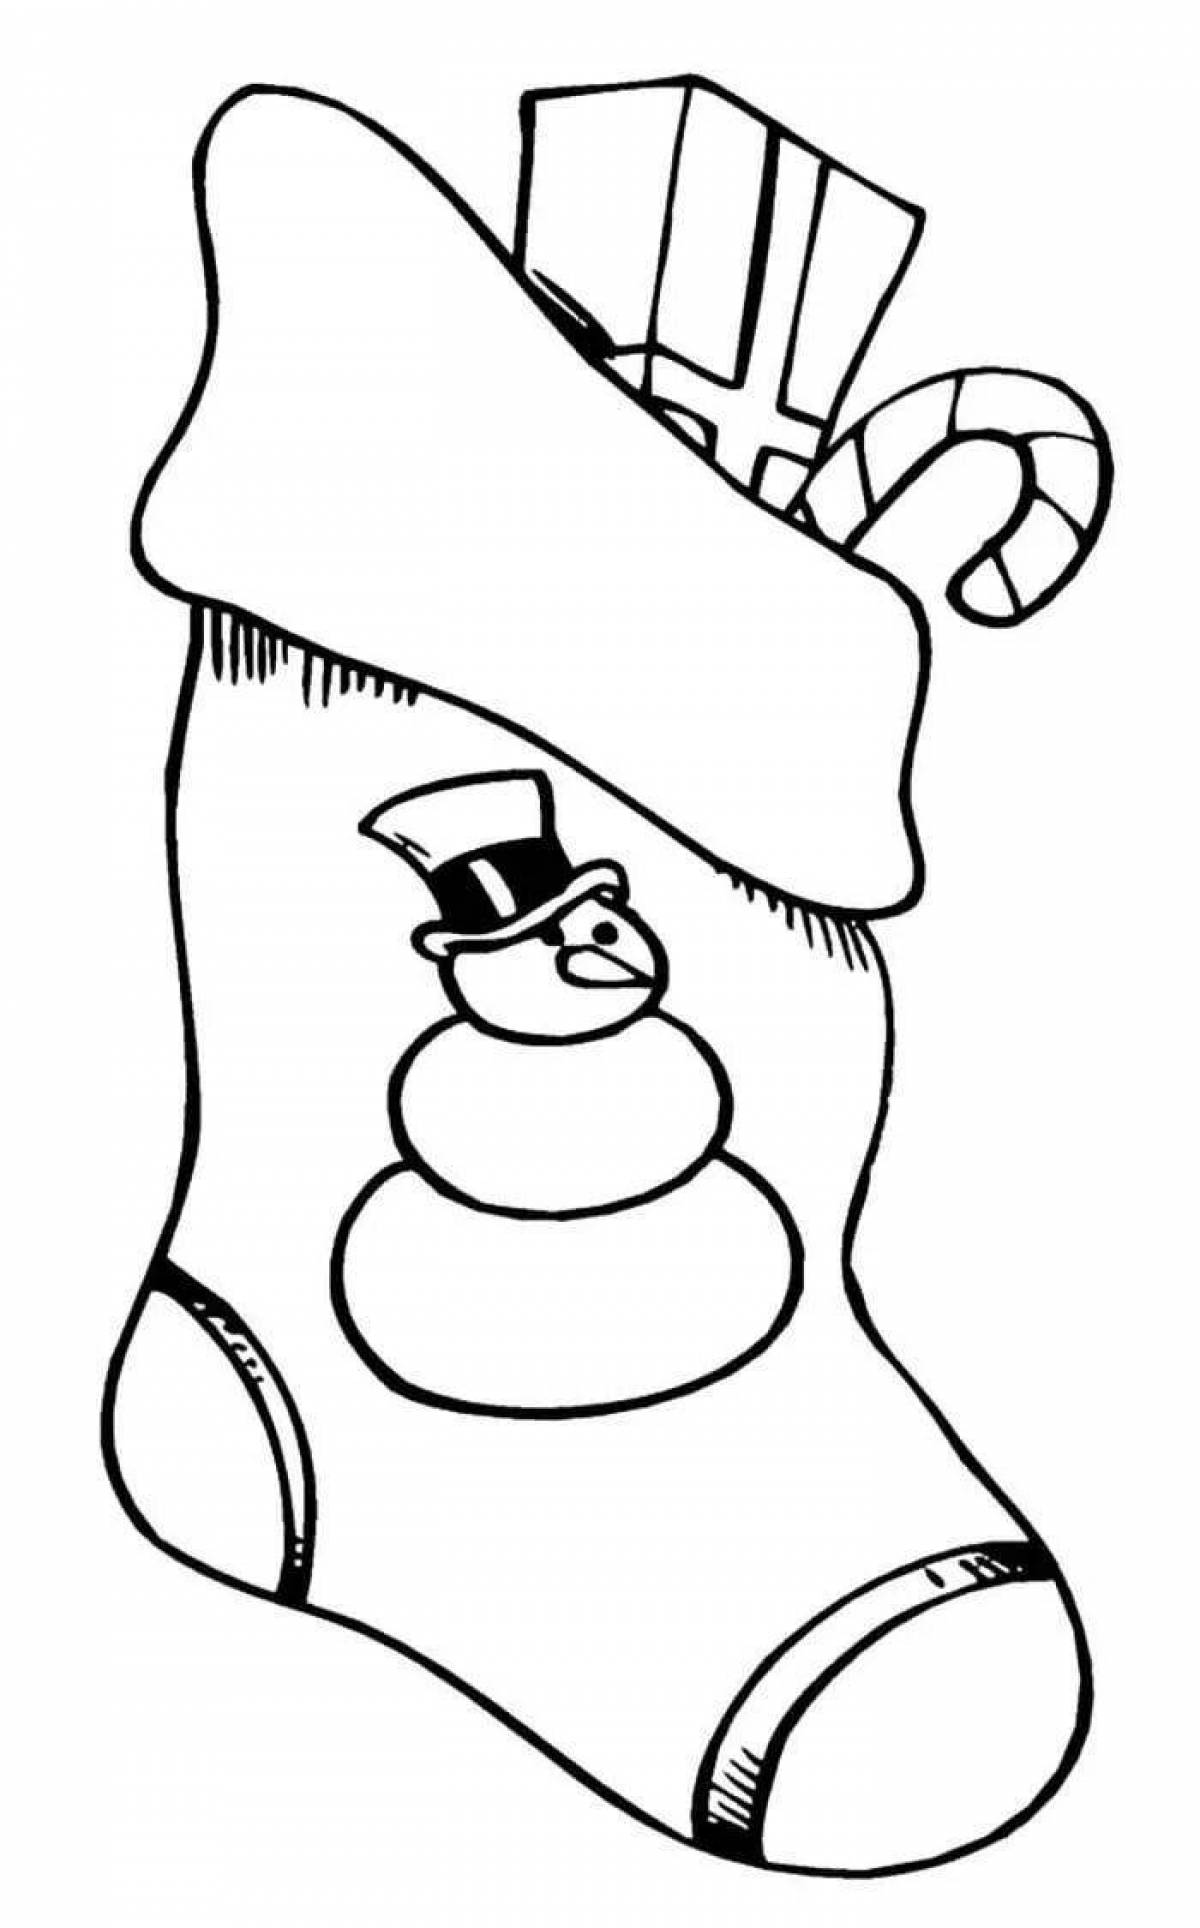 Attractive coloring of the Christmas boot